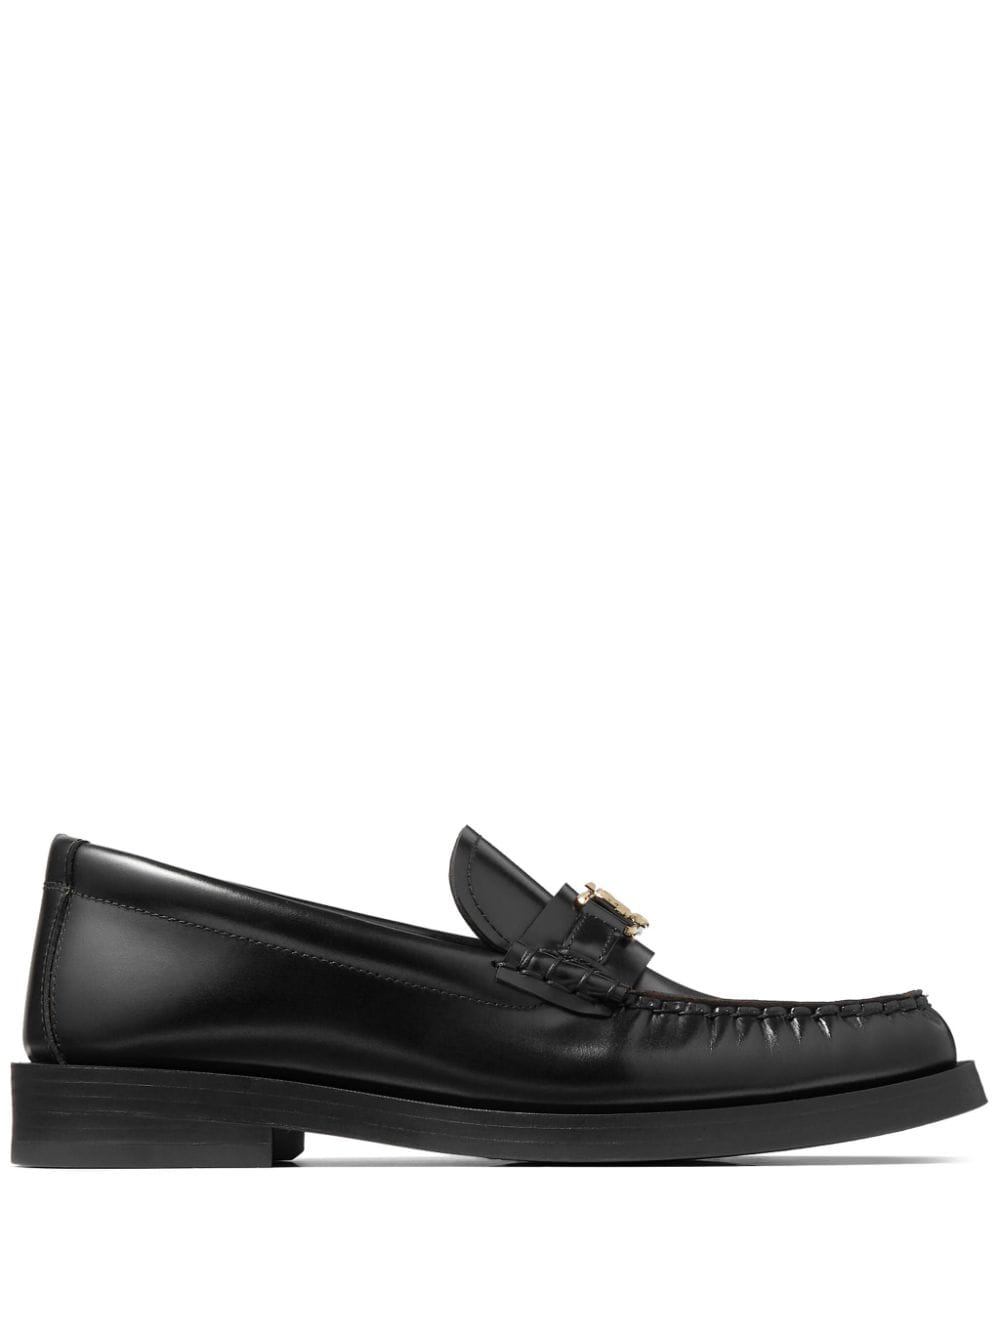 Addie logo-plaque leather loafers<BR/><BR/><BR/>